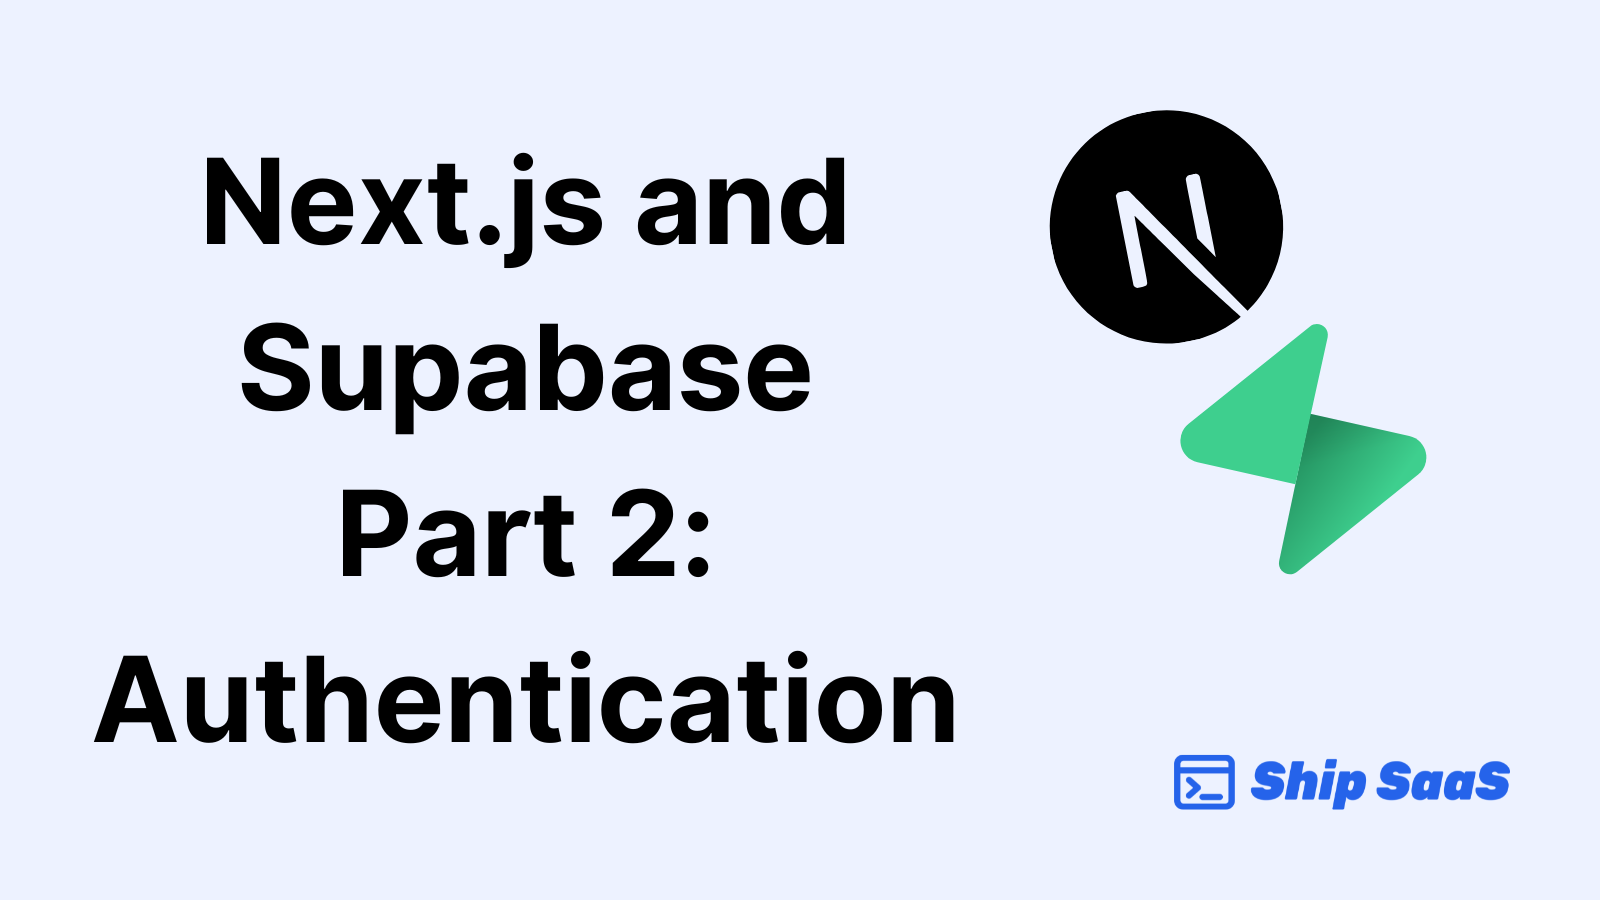 Get started with Next.js and Supabase - Part 2